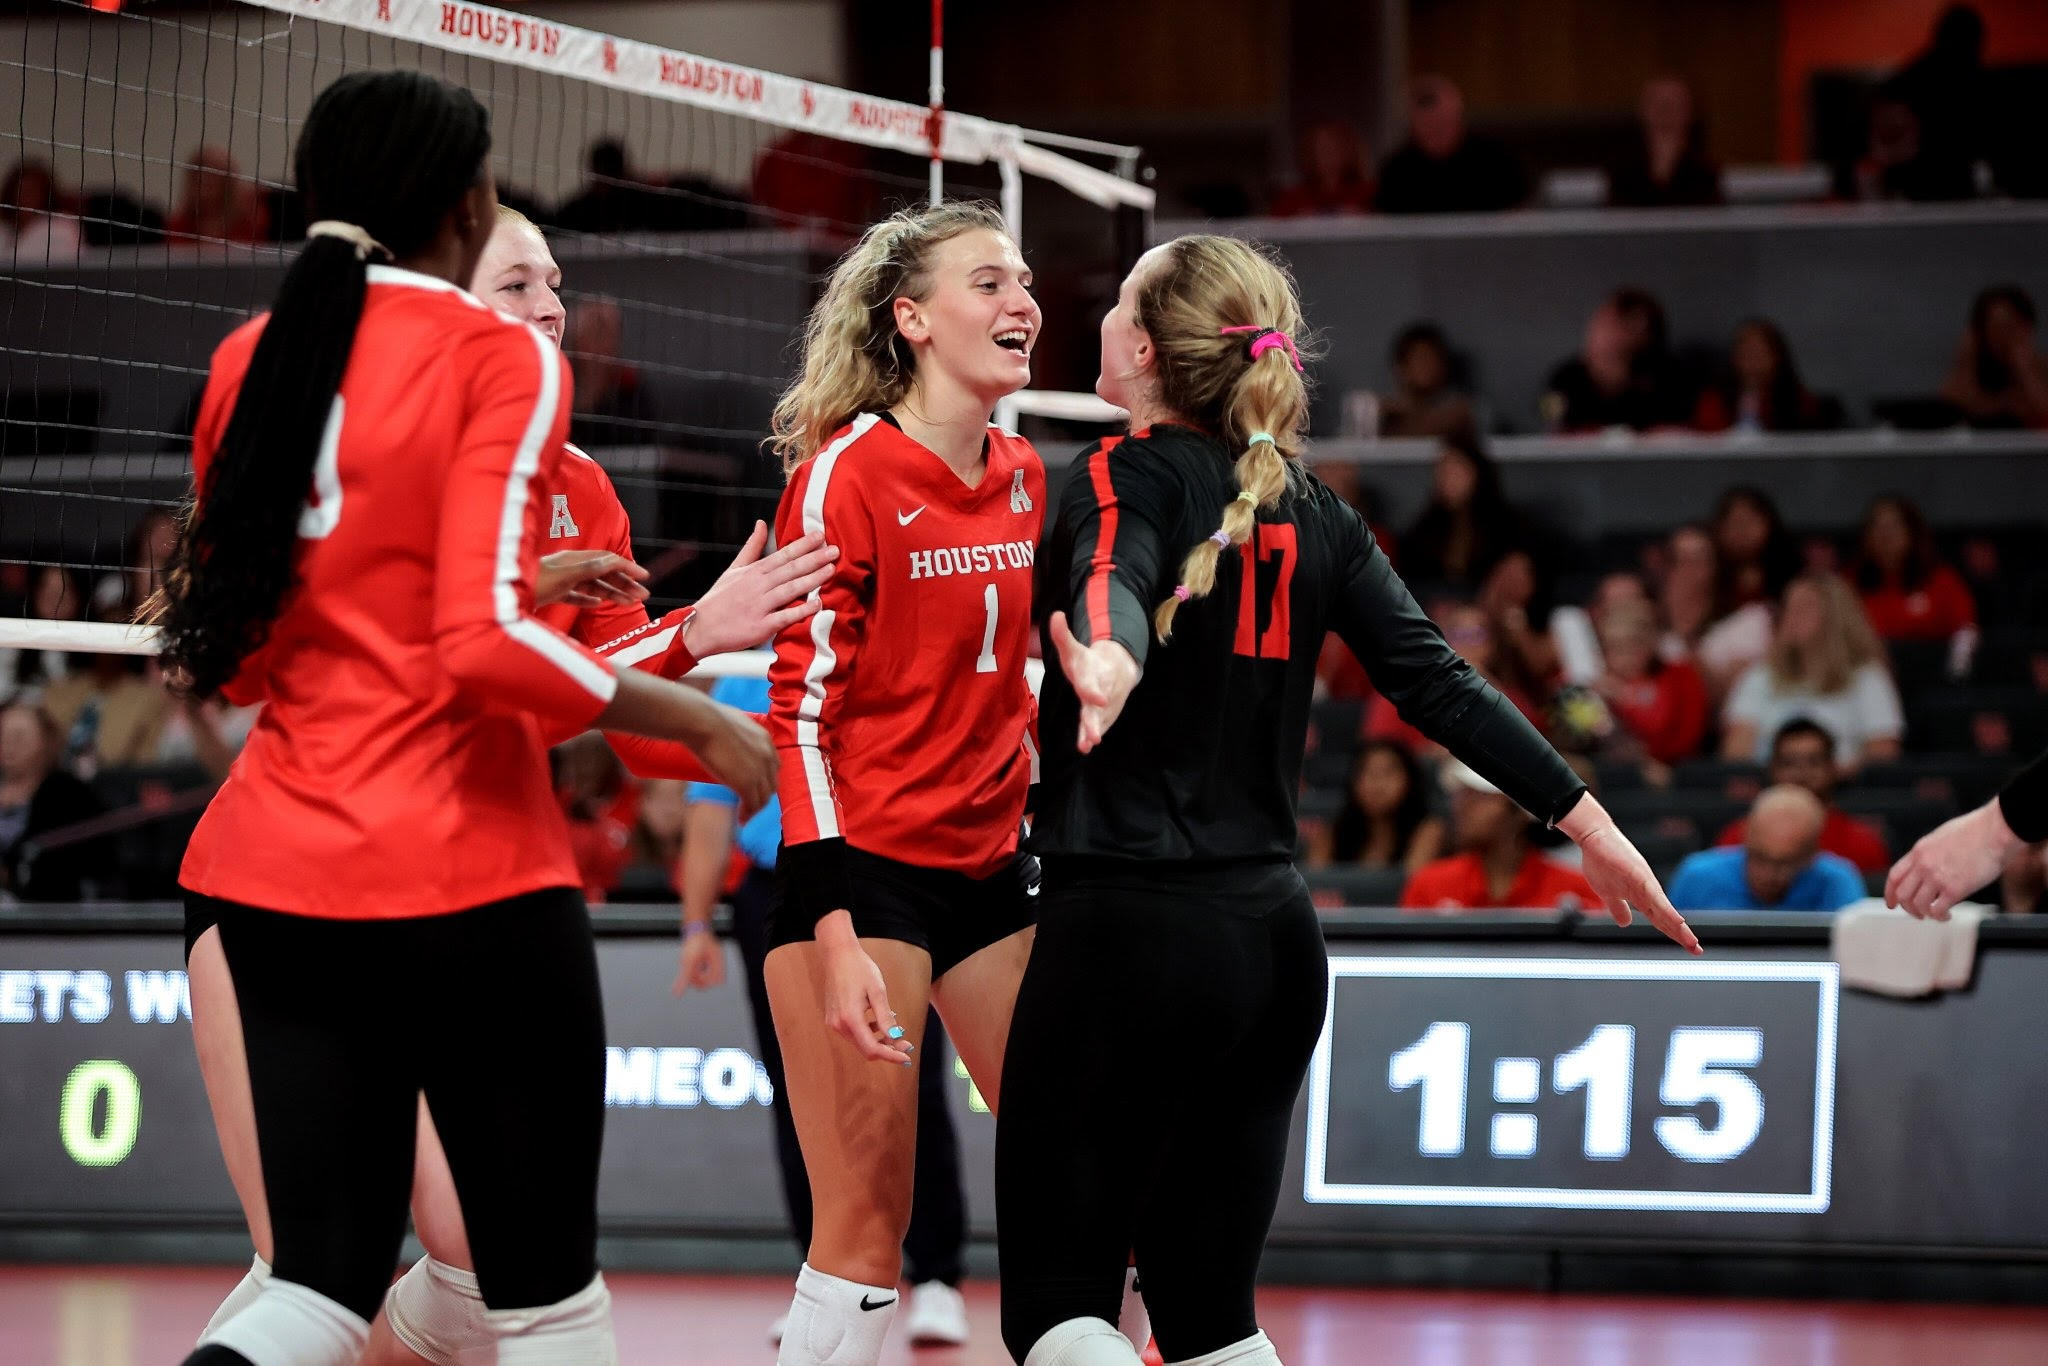 UH volleyball improved to 4-1 with two wins in the Flo Hyman Collegiate Cup on Friday. | Courtesy of UH athletics